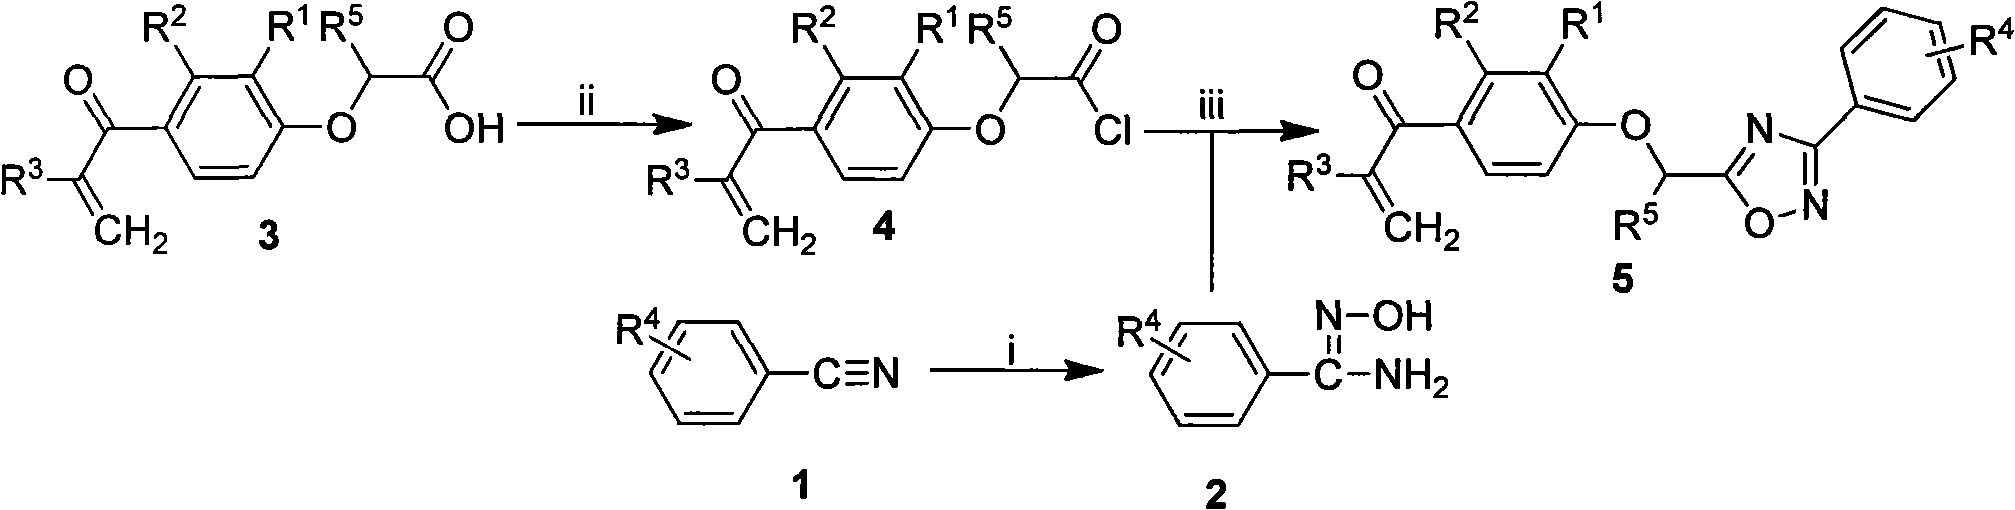 Alpha, beta-unsaturated ketone compound containing 1,2,4-oxadiazoles heterocycle